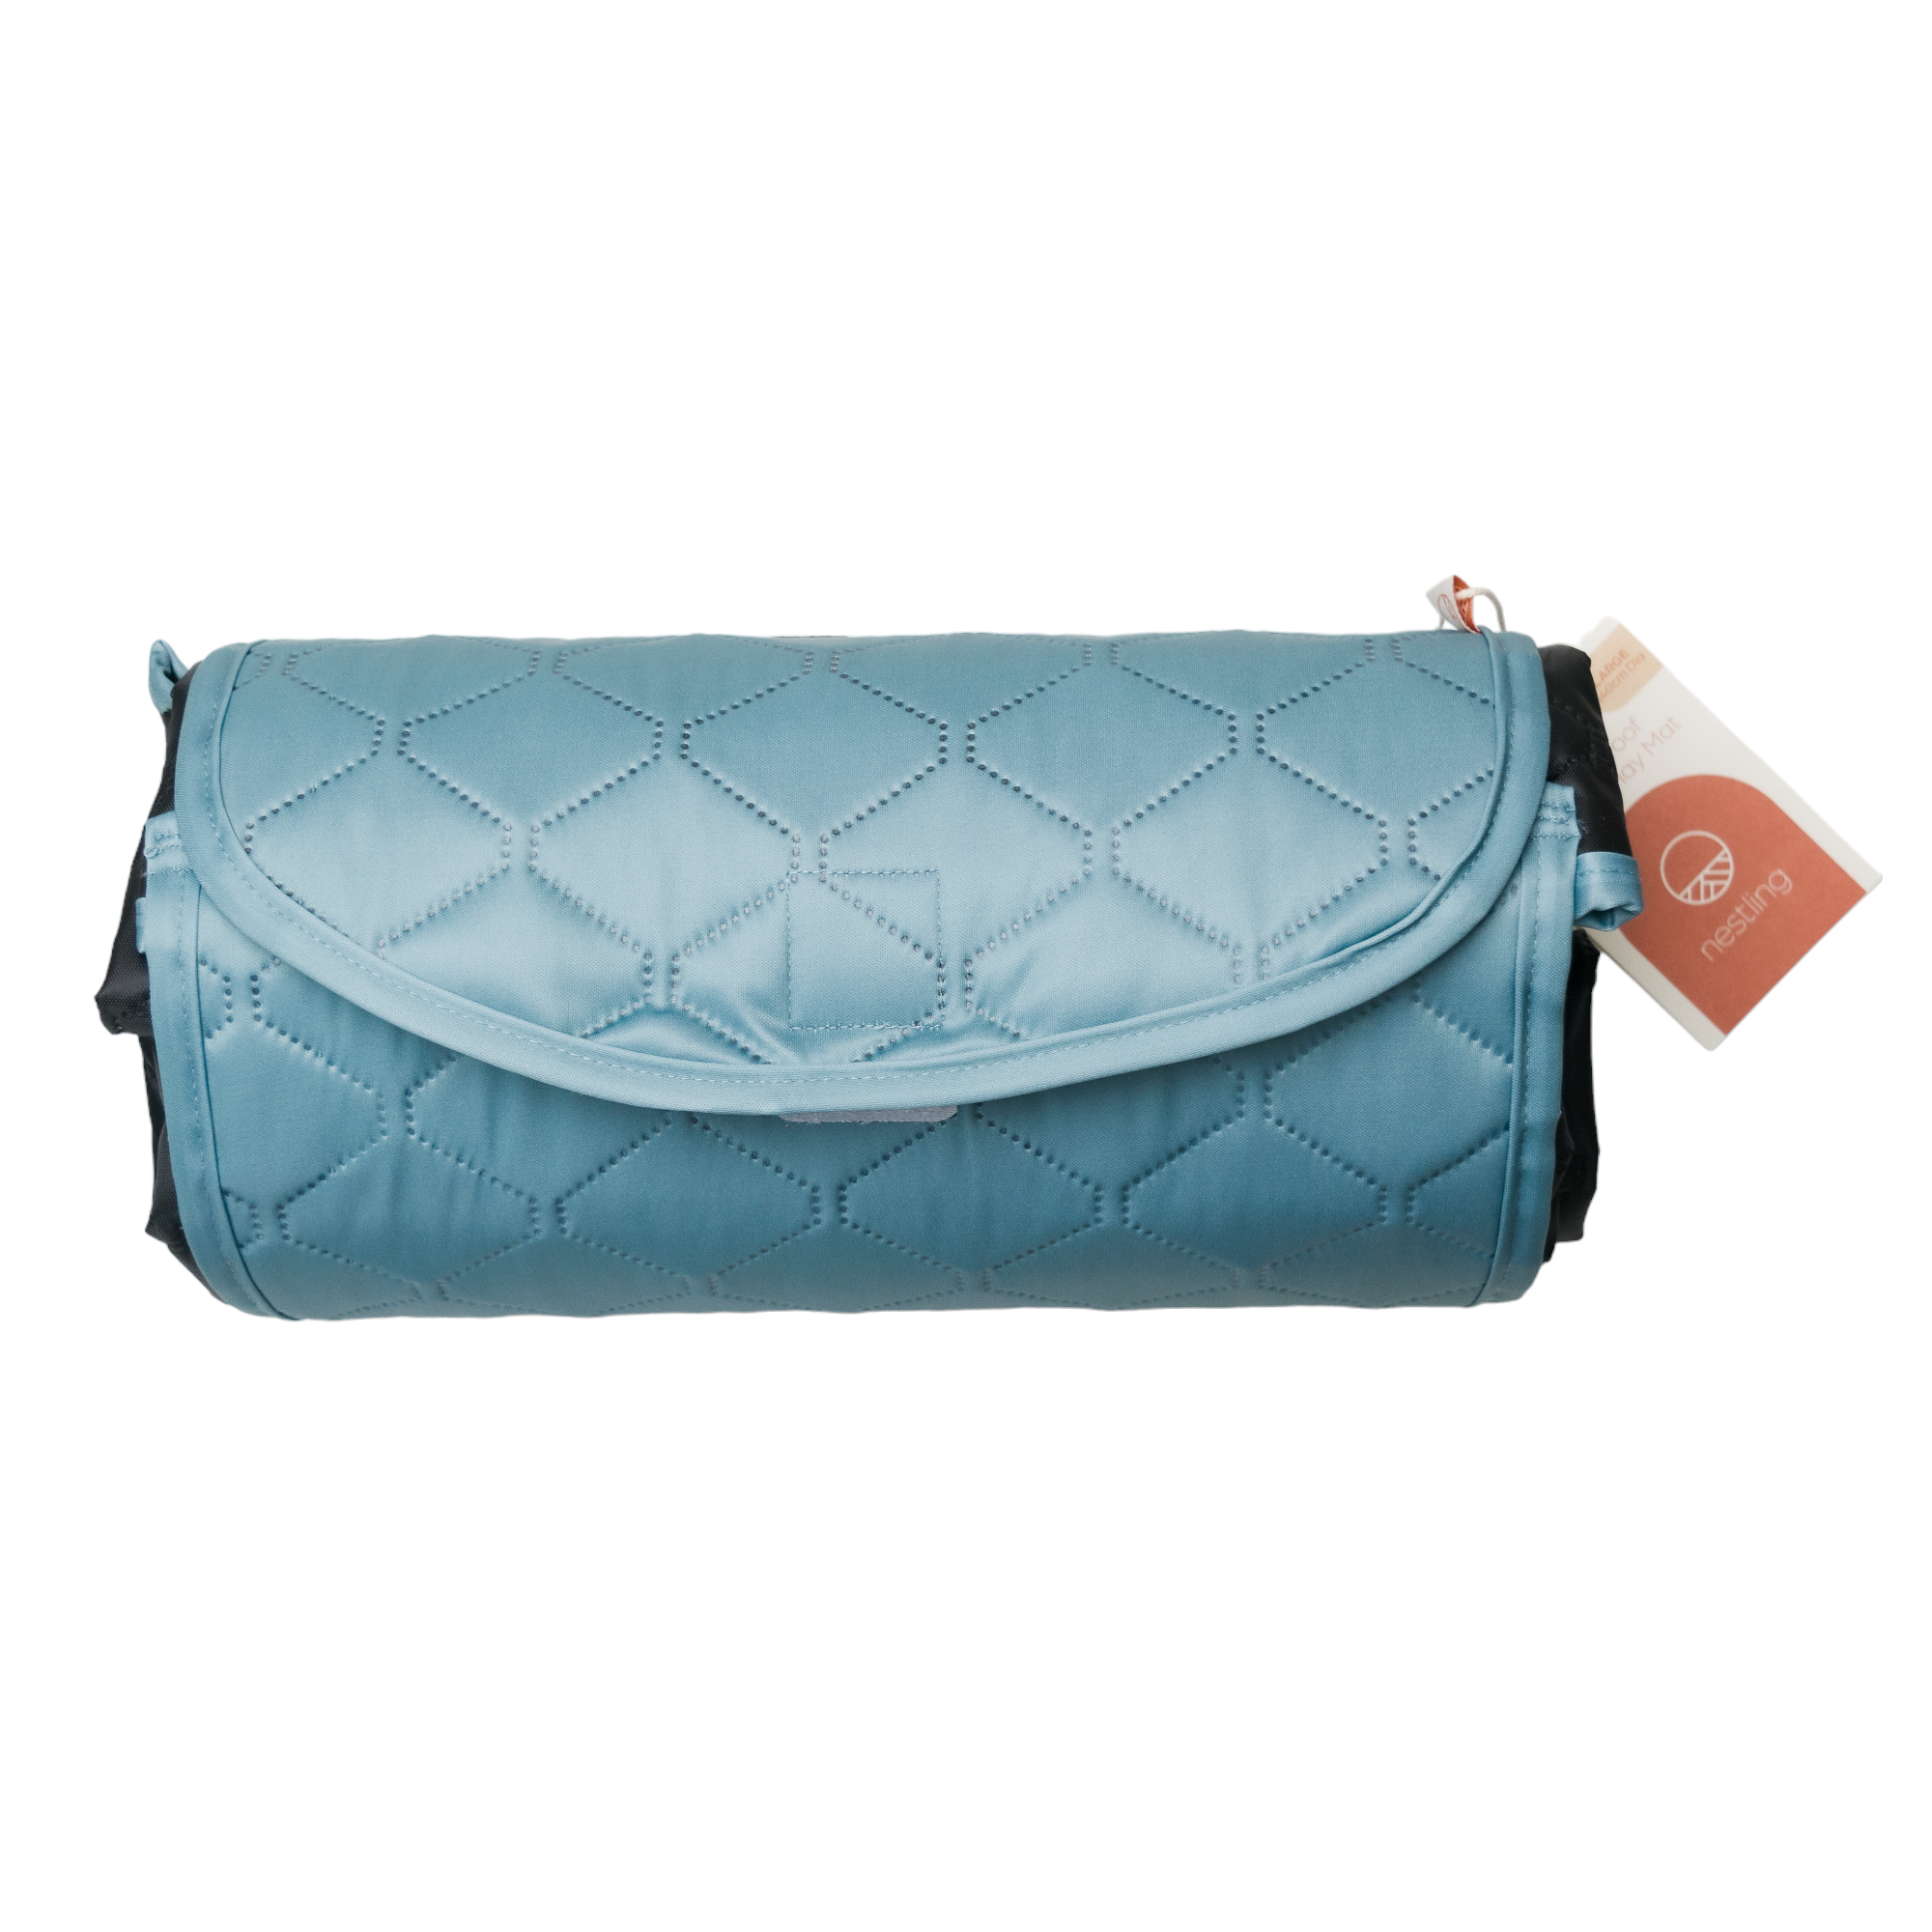 Nestling Large Waterproof Quilted Play Mat - Katherine Quinn Collection